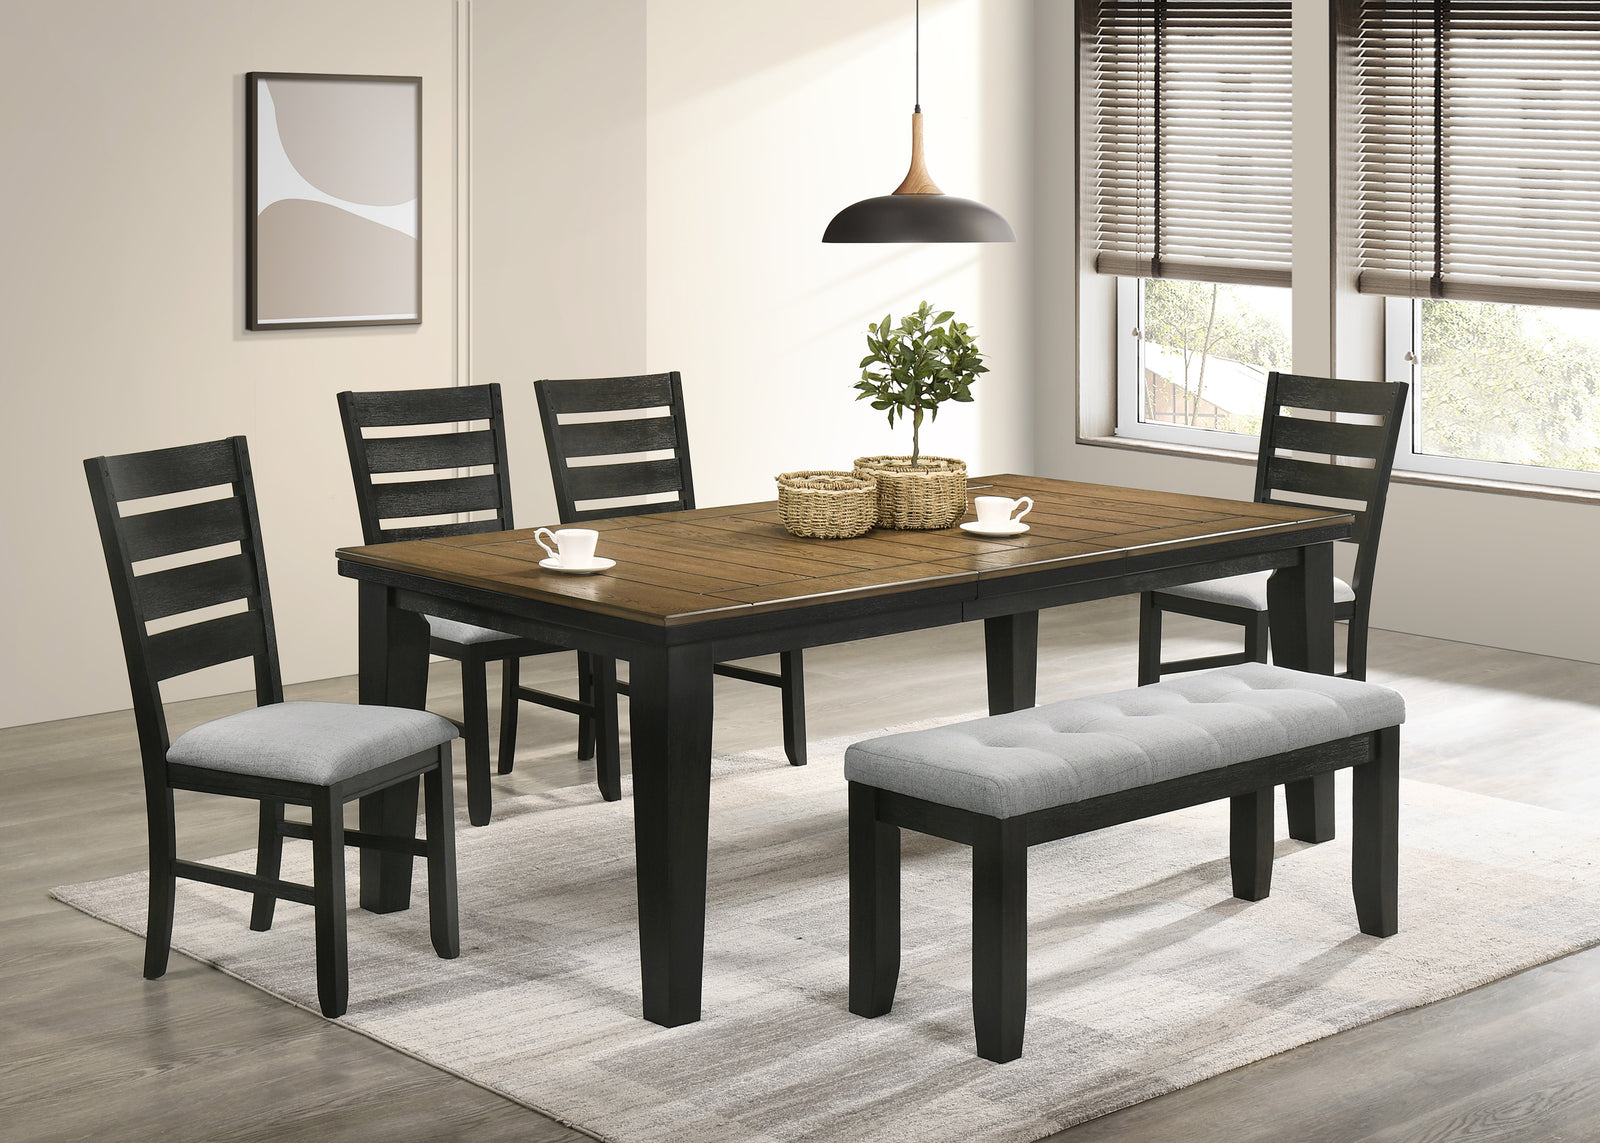 Bardstown Wheat Charcoal Modern Solid Wood Fabric Upholstered Tufted Dining Room Set